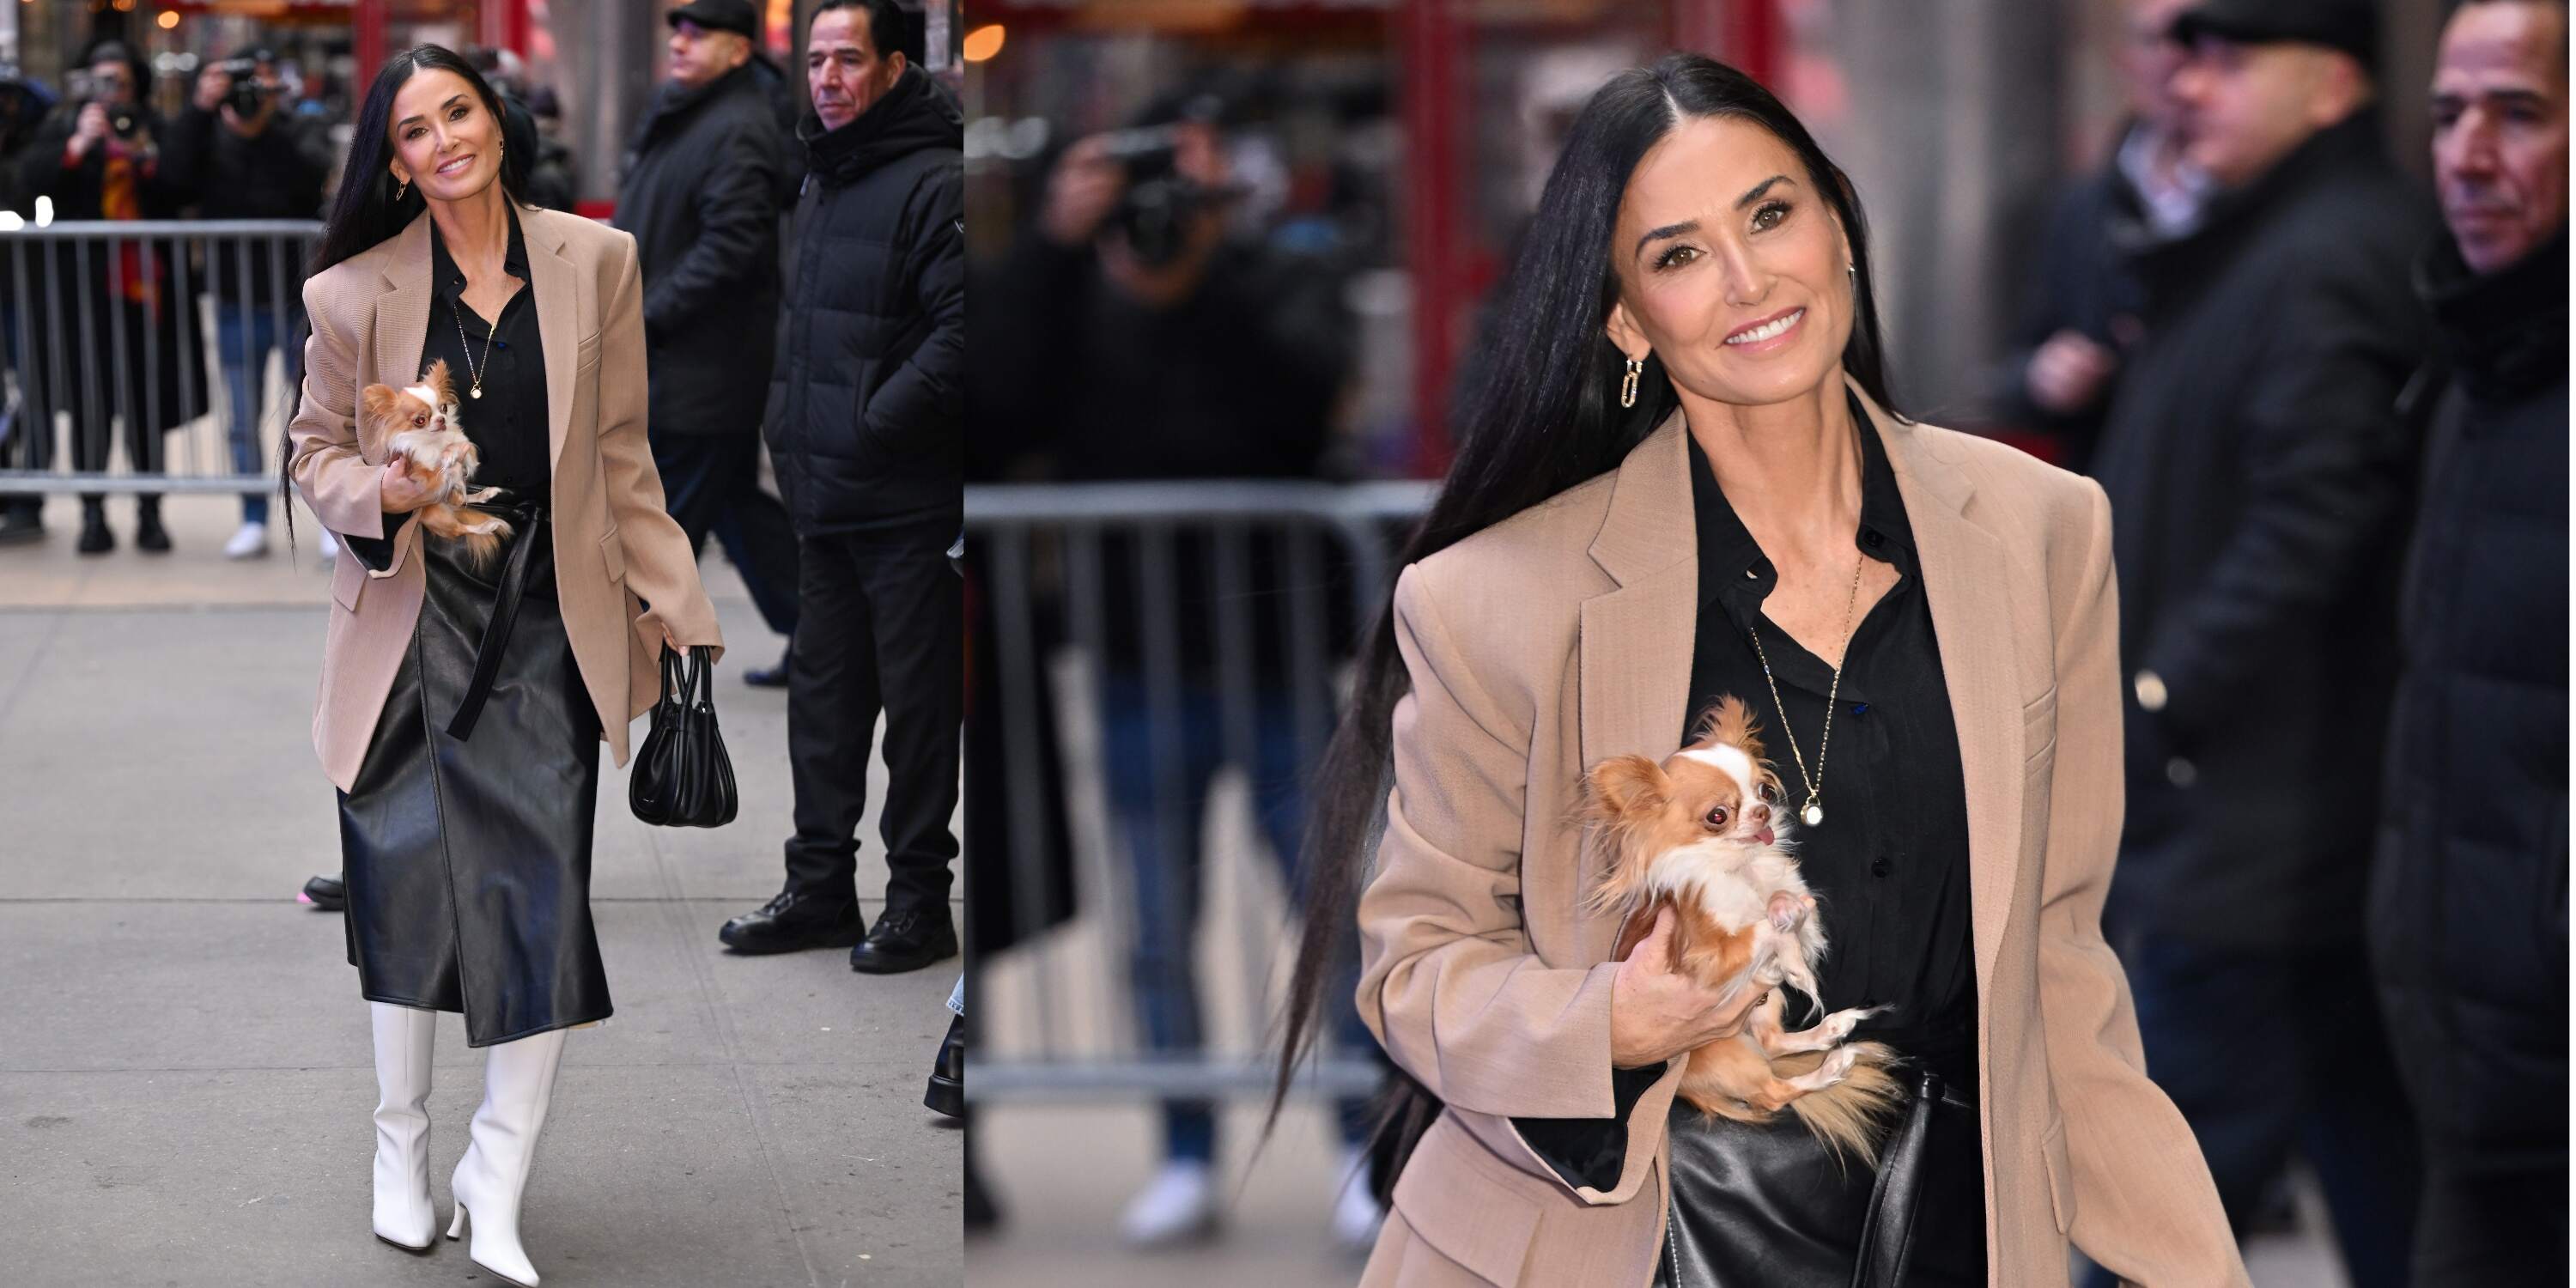 Actor Demi Moore, 61, Looks RADIANT on New York City Streets